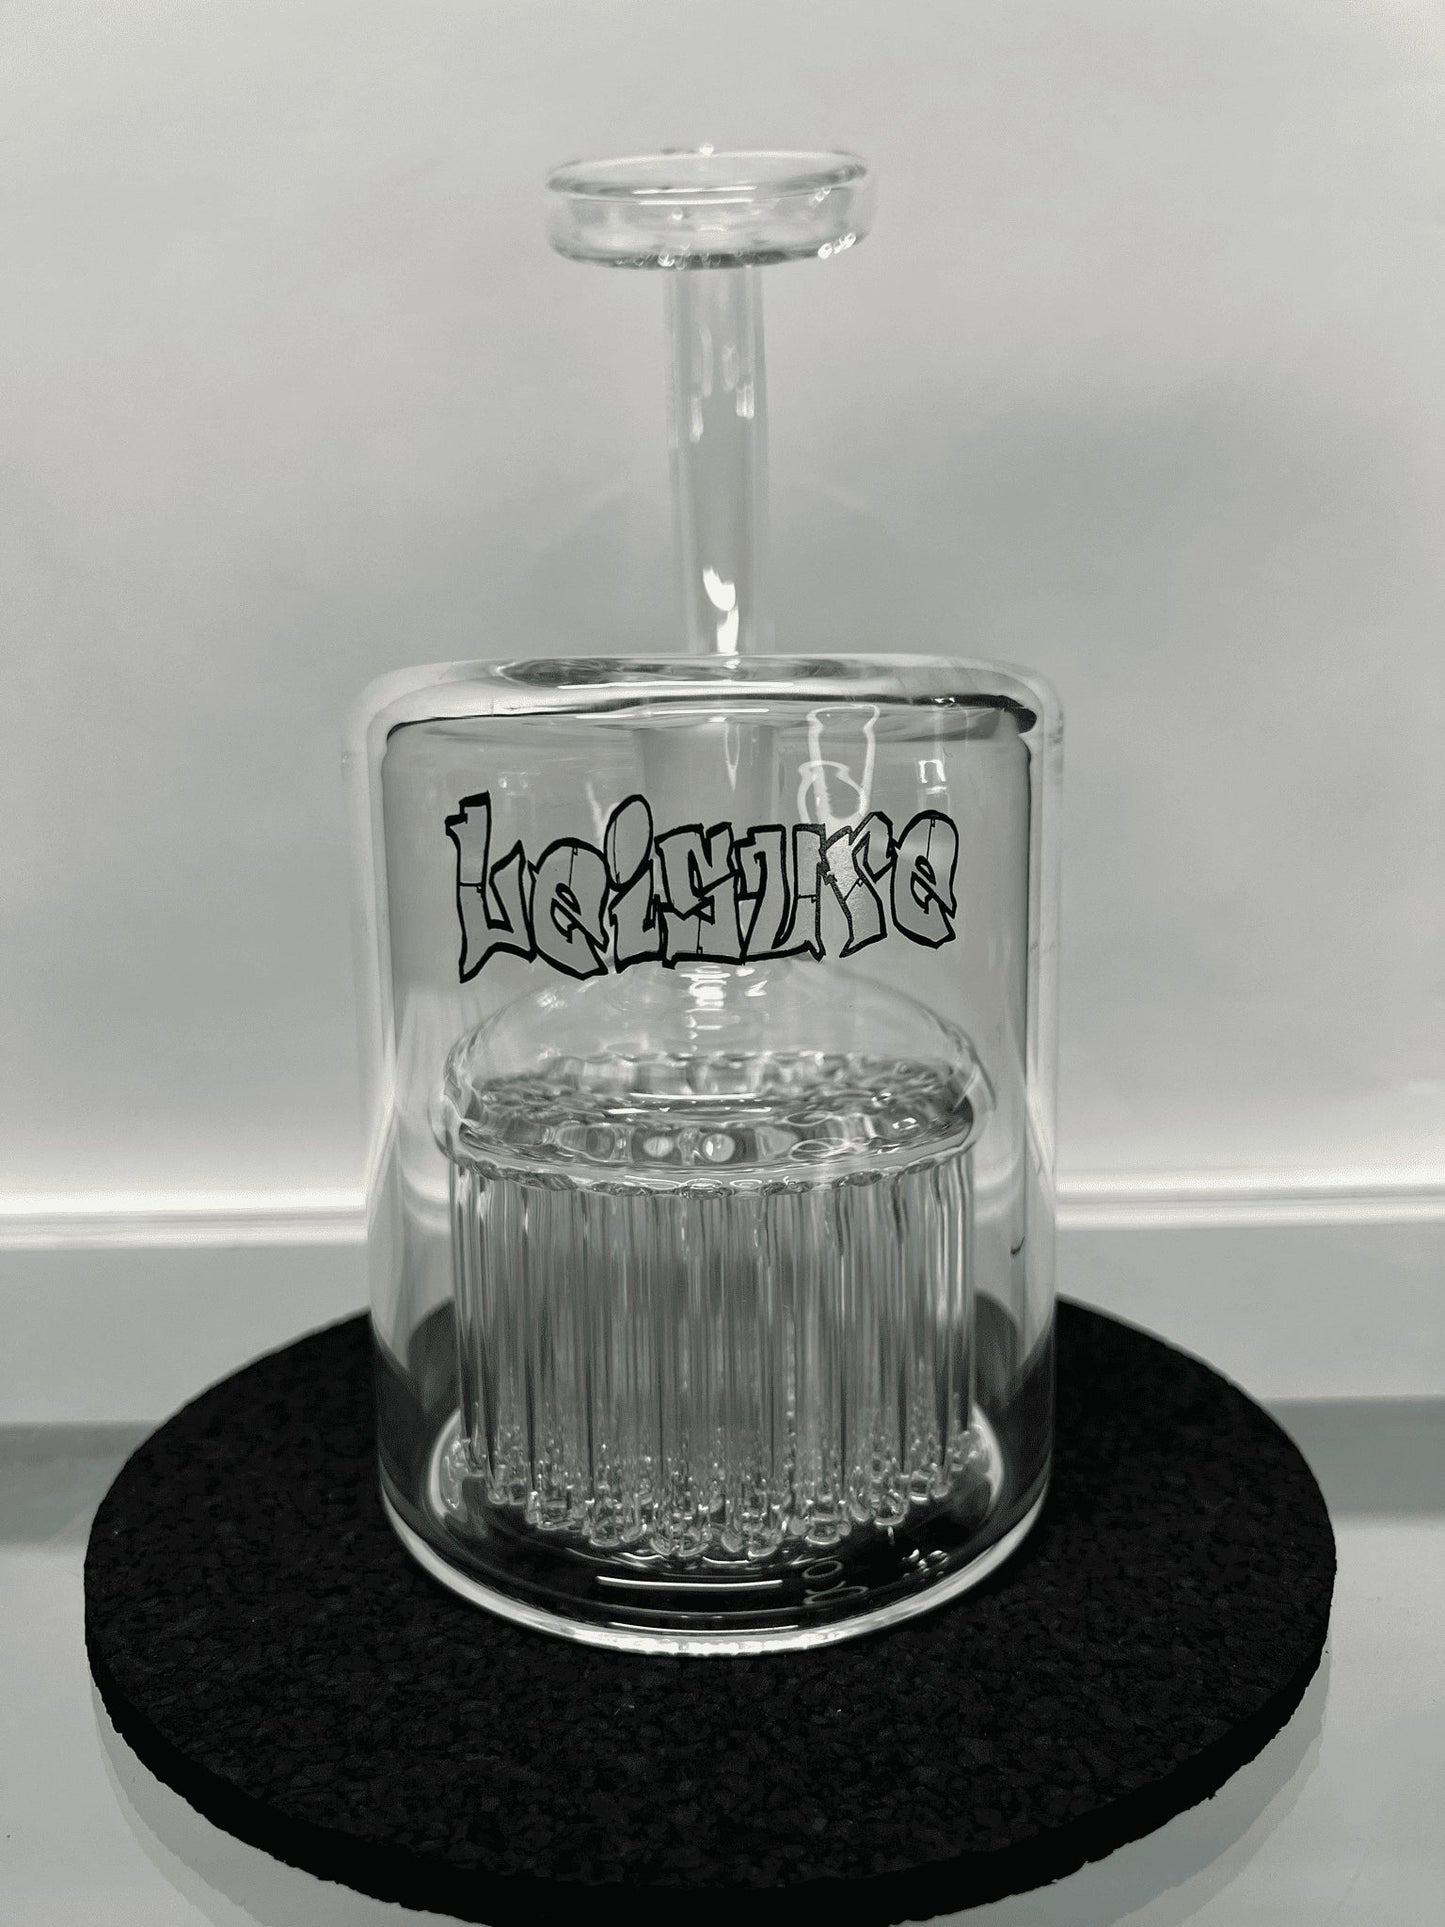 meticulously crafted design of the (L10) Leisure 54 Arm Rig/Bubbler